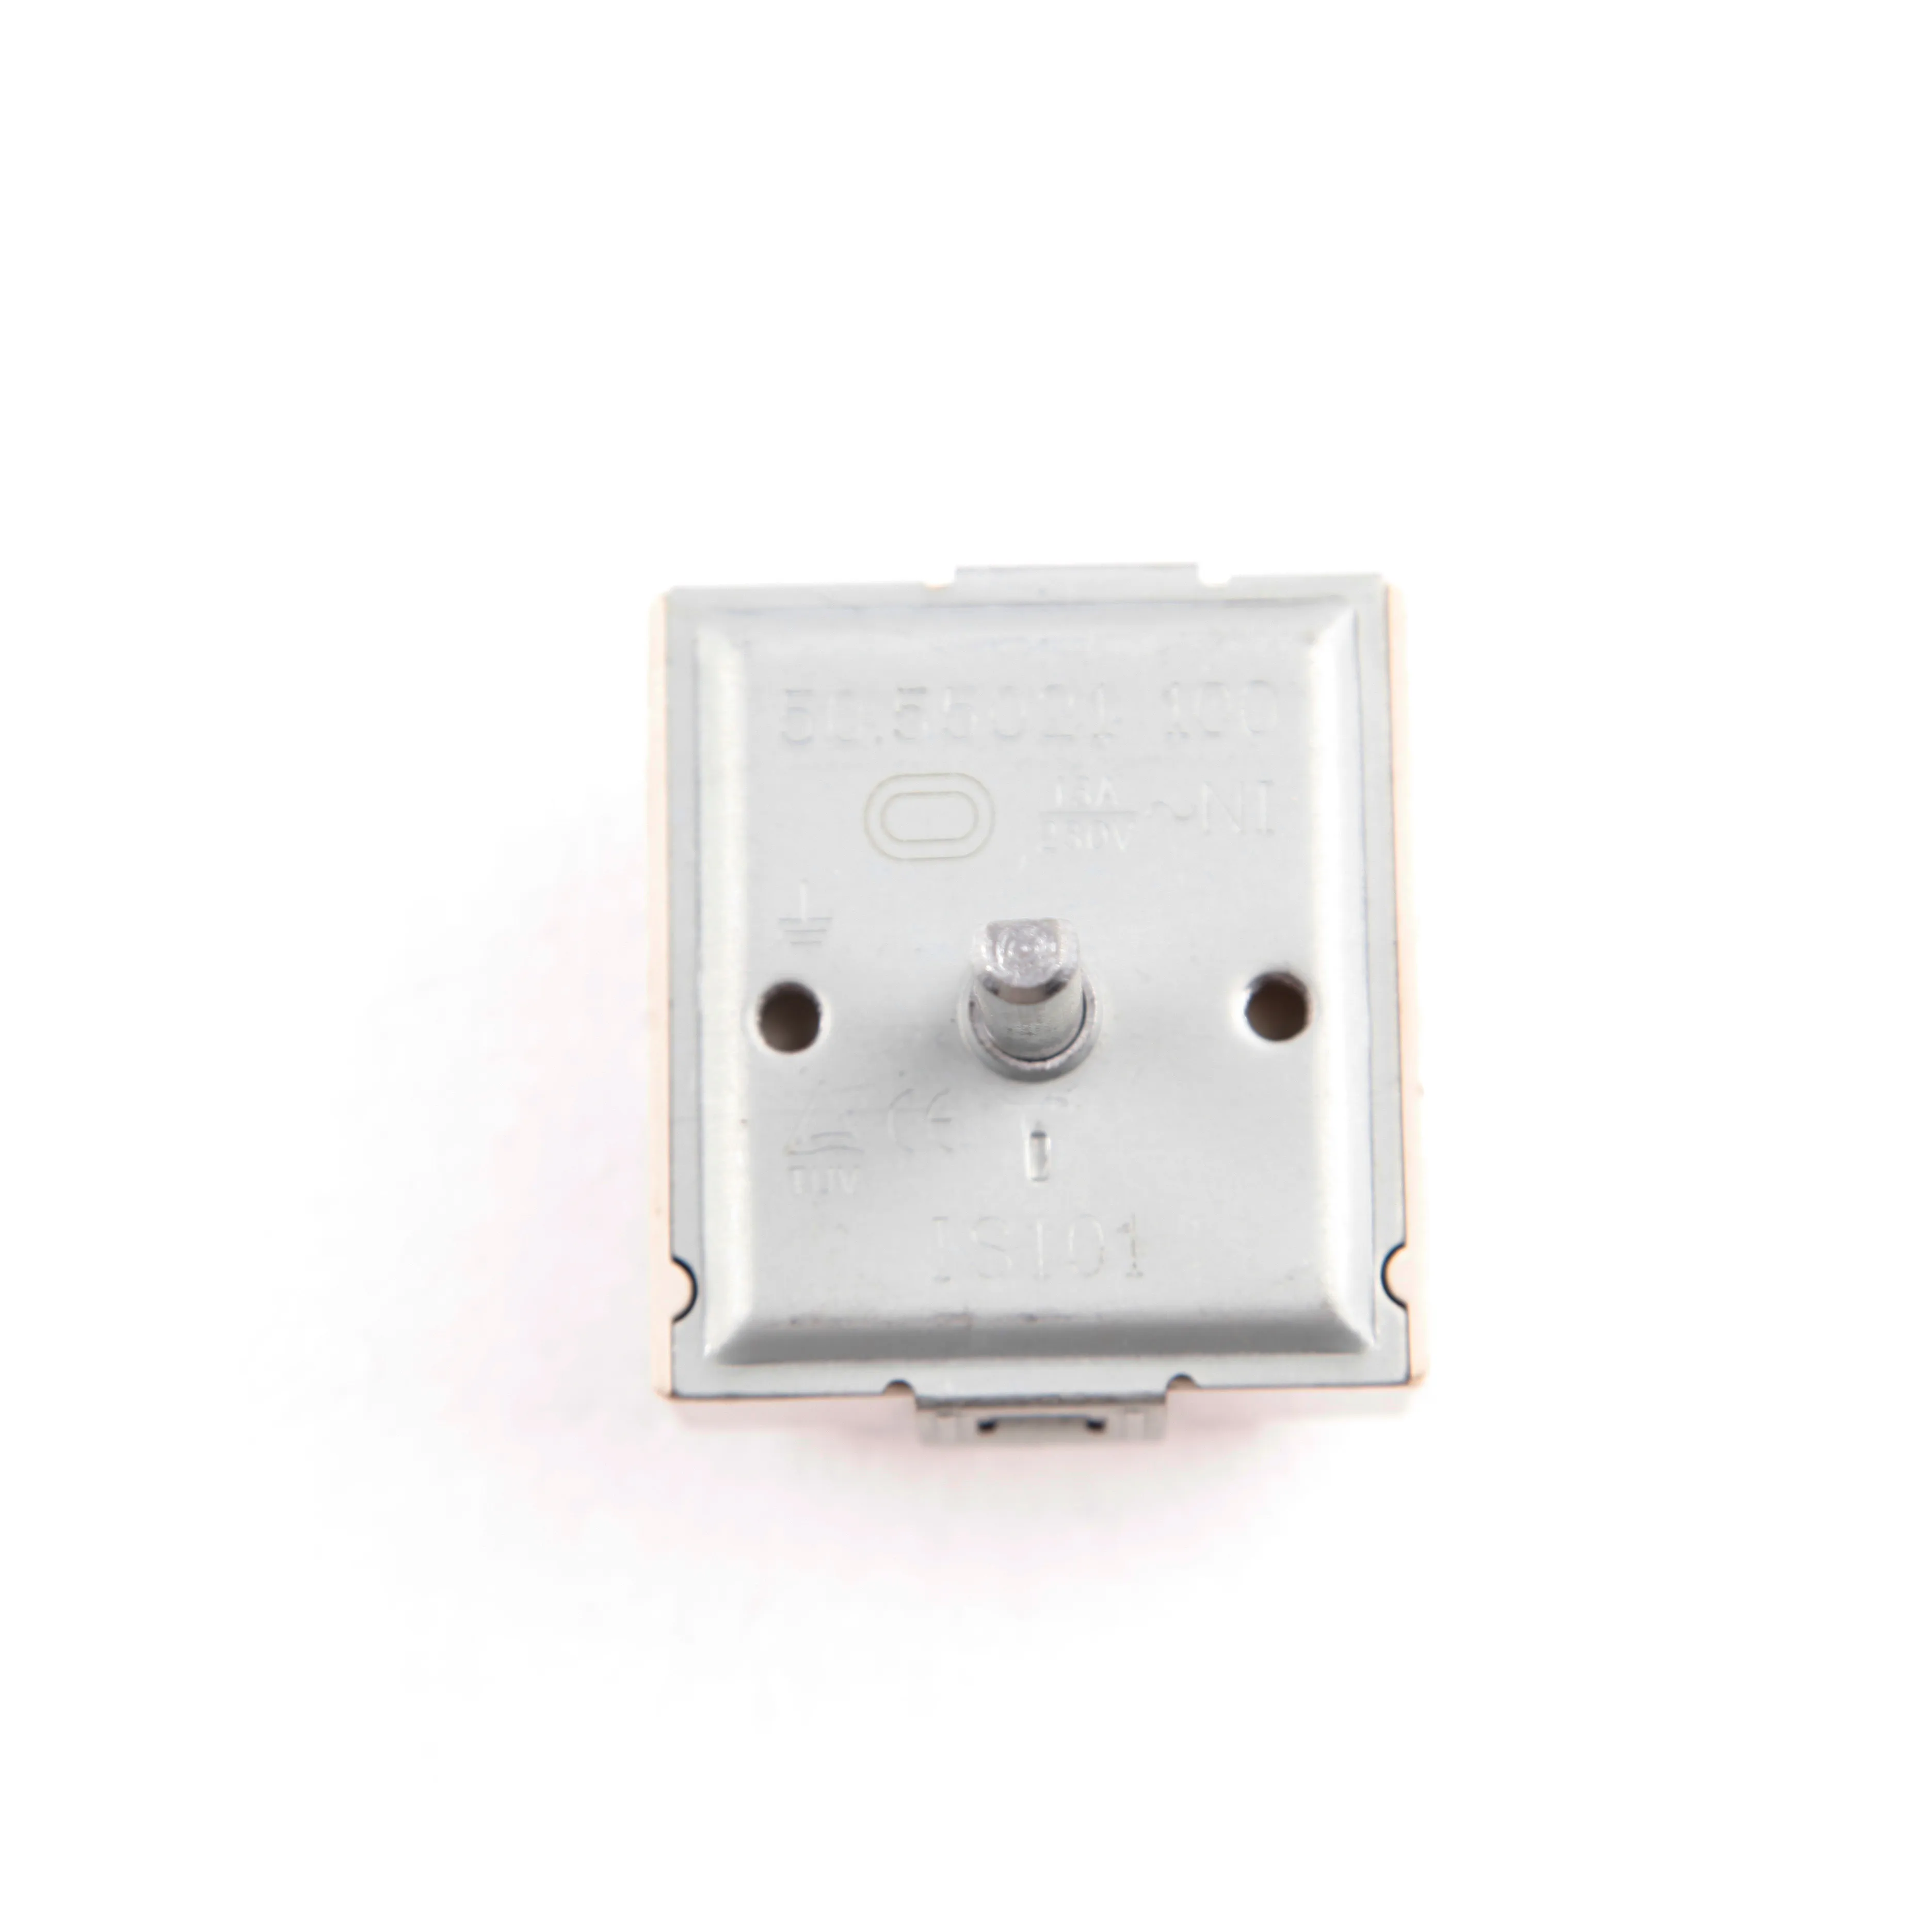 Used for high quality energy switch control of household appliances such as kitchen appliances and electric furnace